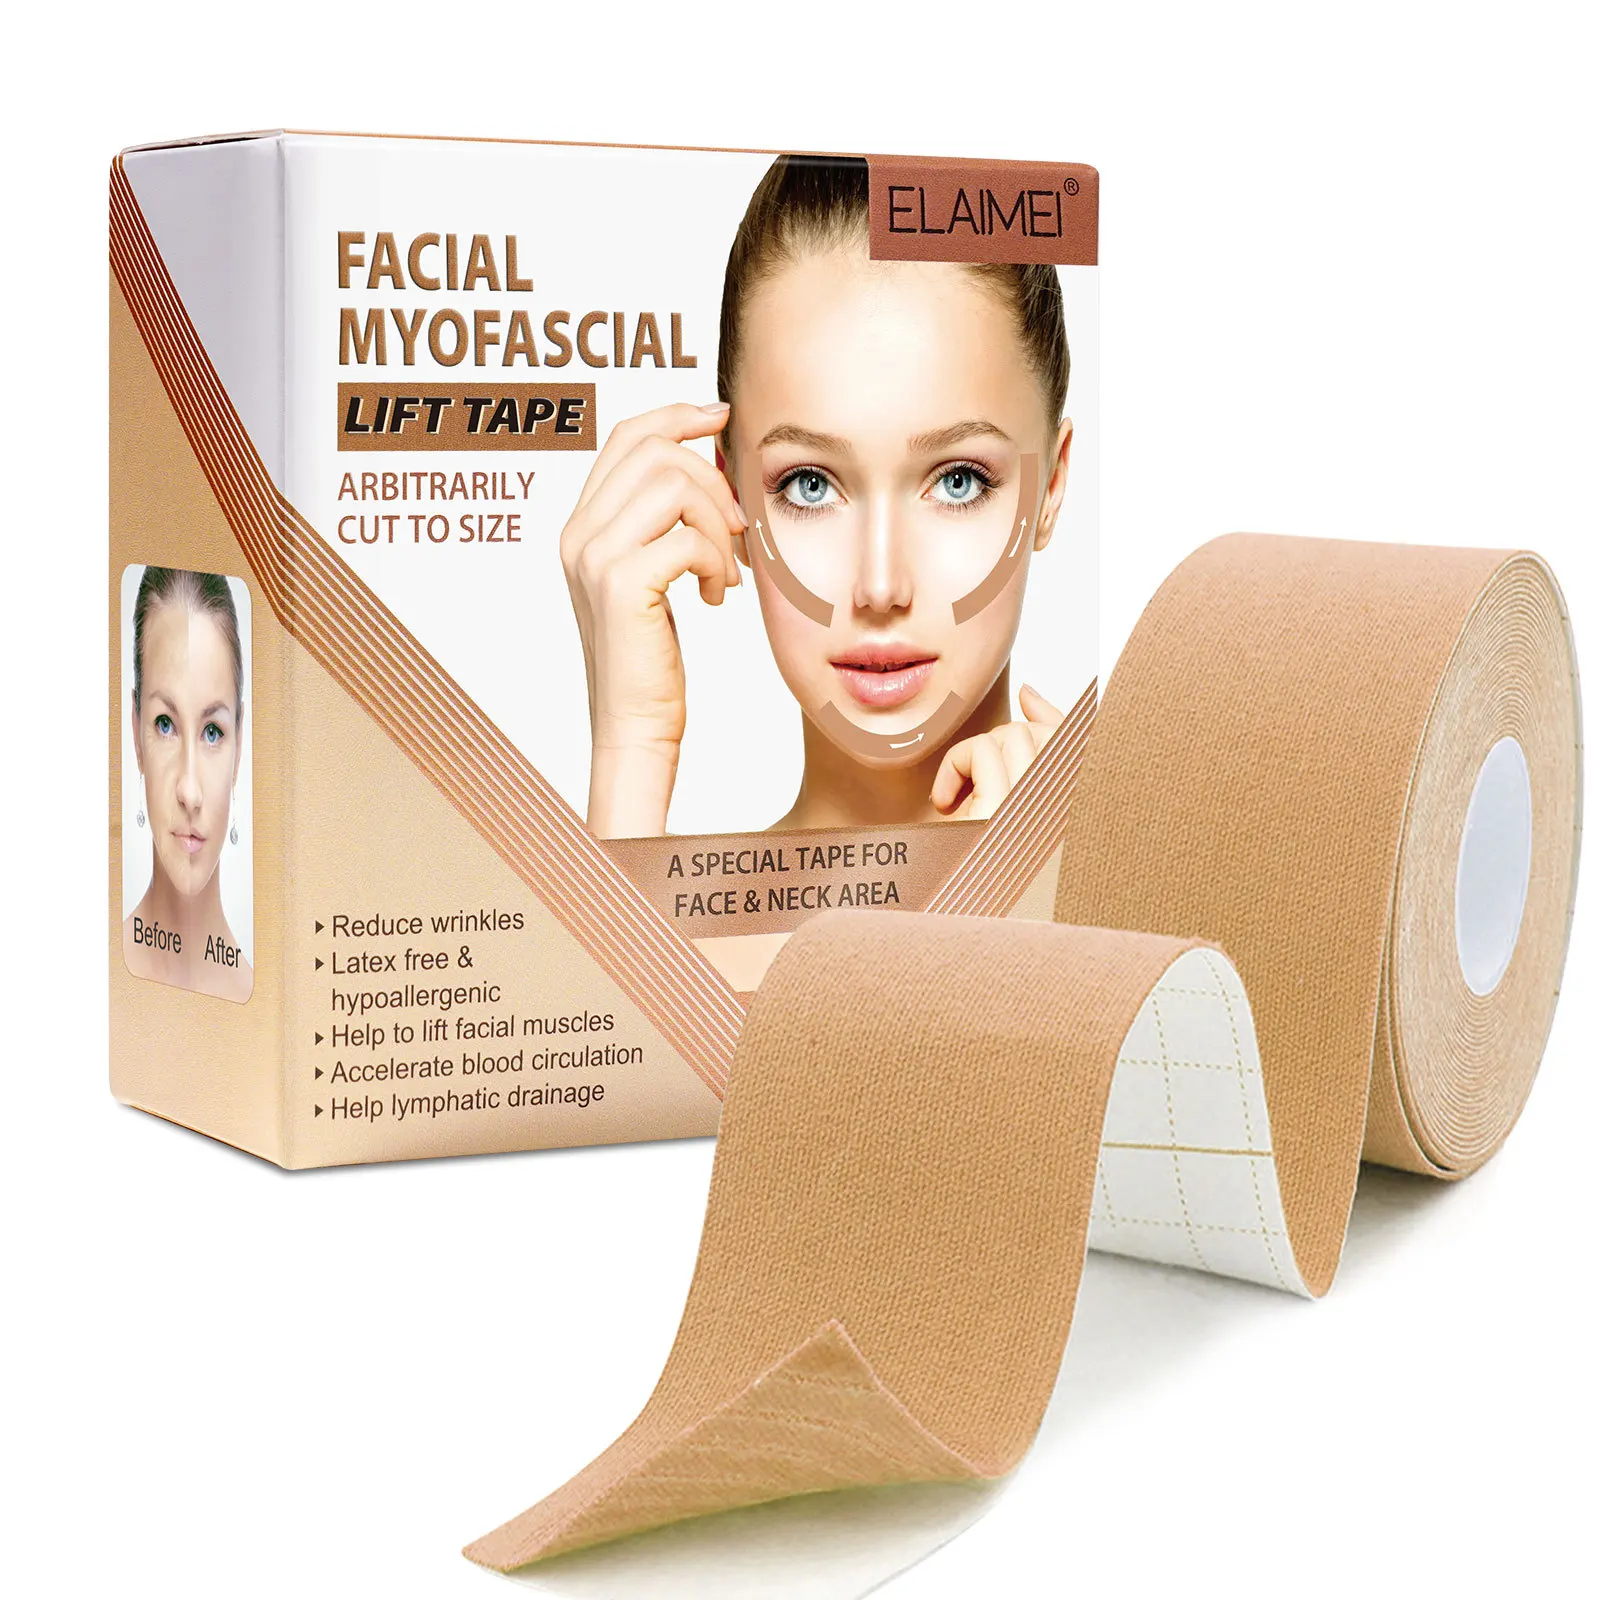 2.5CM*5M Instant Facial Myofascial Lift Tape For Face Neck Eyes Skin Lifting Tool Wrinkle Removal Sticker V Face Elastic Bandage solder removal braid desoldering wire mesh braid tape copper braid welding point soldering wick tin lead cord flux for soldering